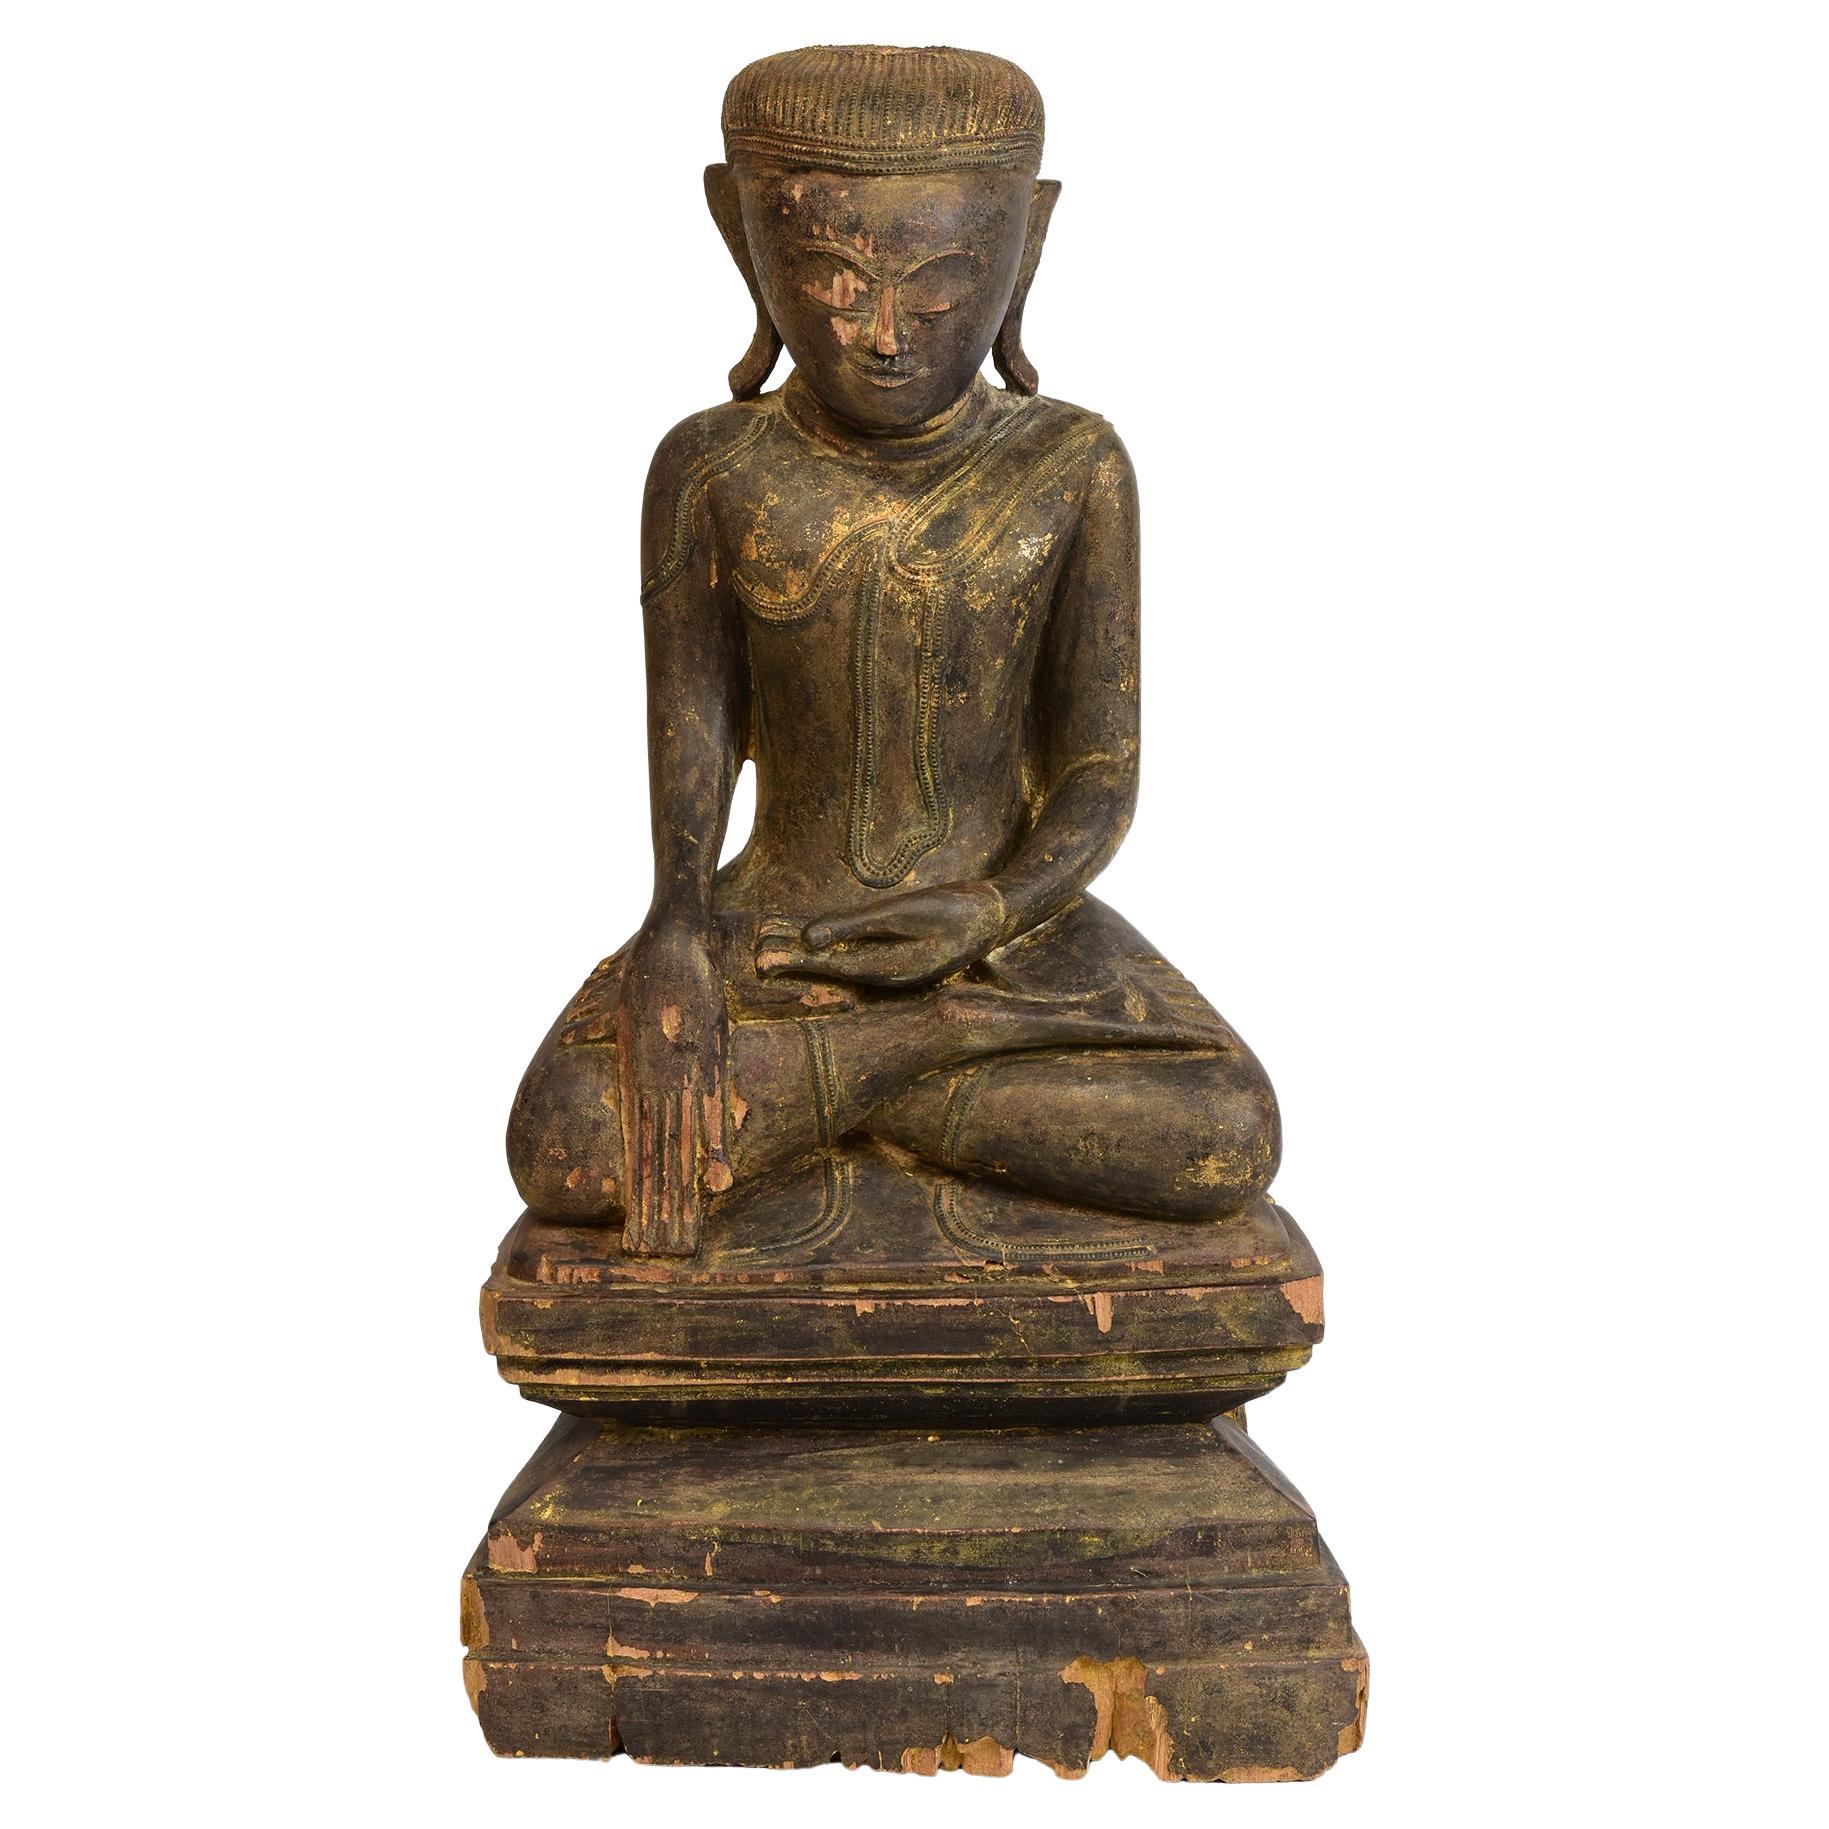 17th - 18th Century, Shan, Antique Burmese Wooden Seated Buddha For Sale